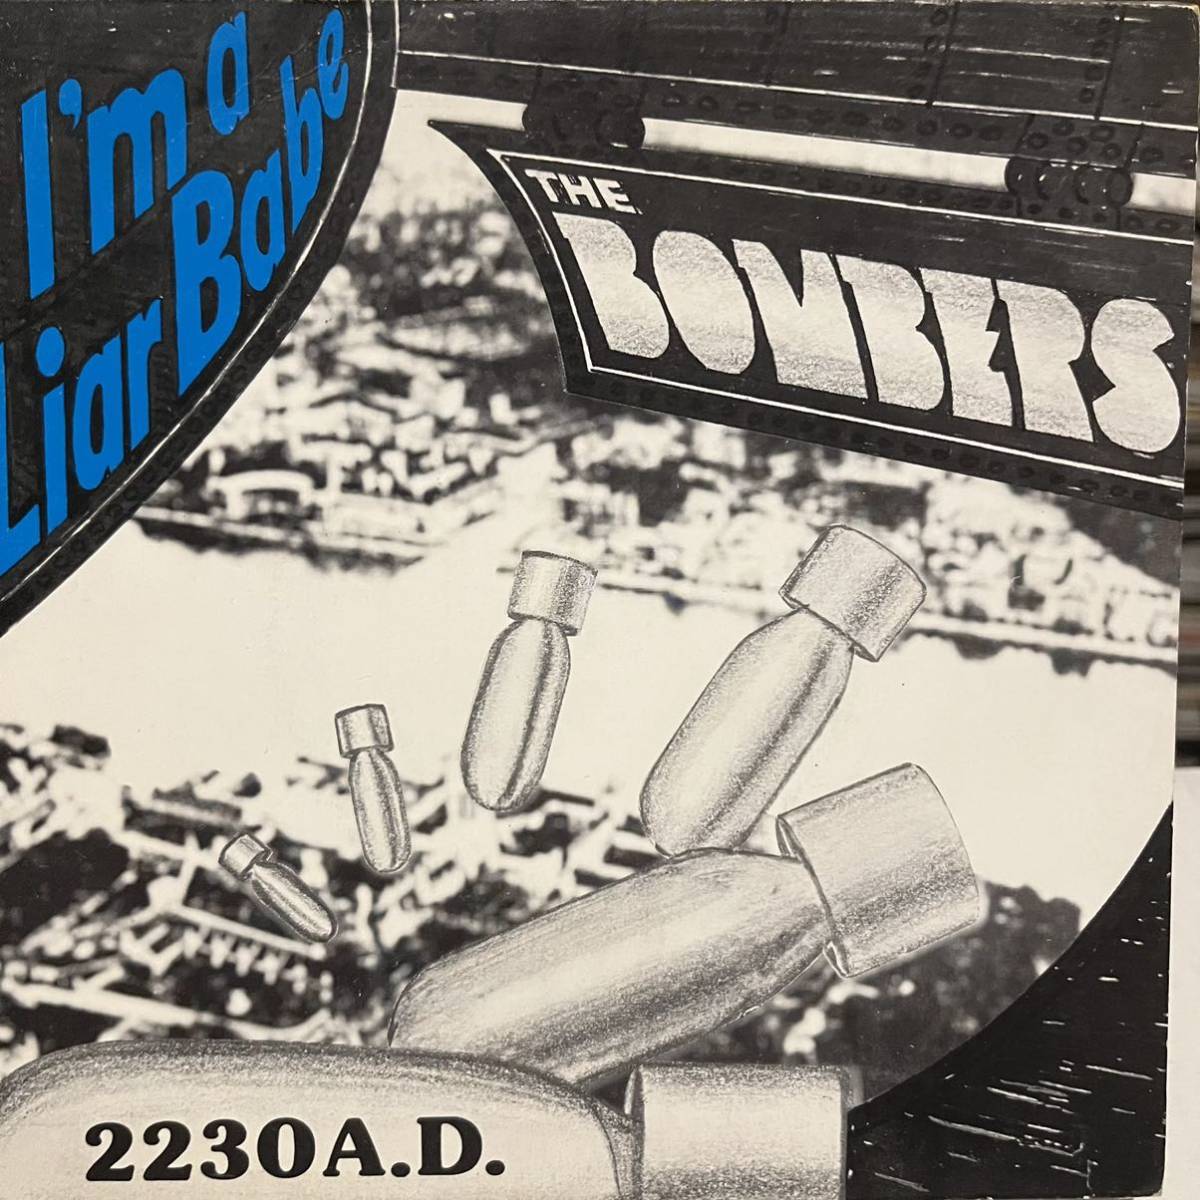 The Bombers I'm A Liar Babe / 2230 A.D. パンク天国 kbd オリジナル盤 punk 初期パンク power pop modsの画像1